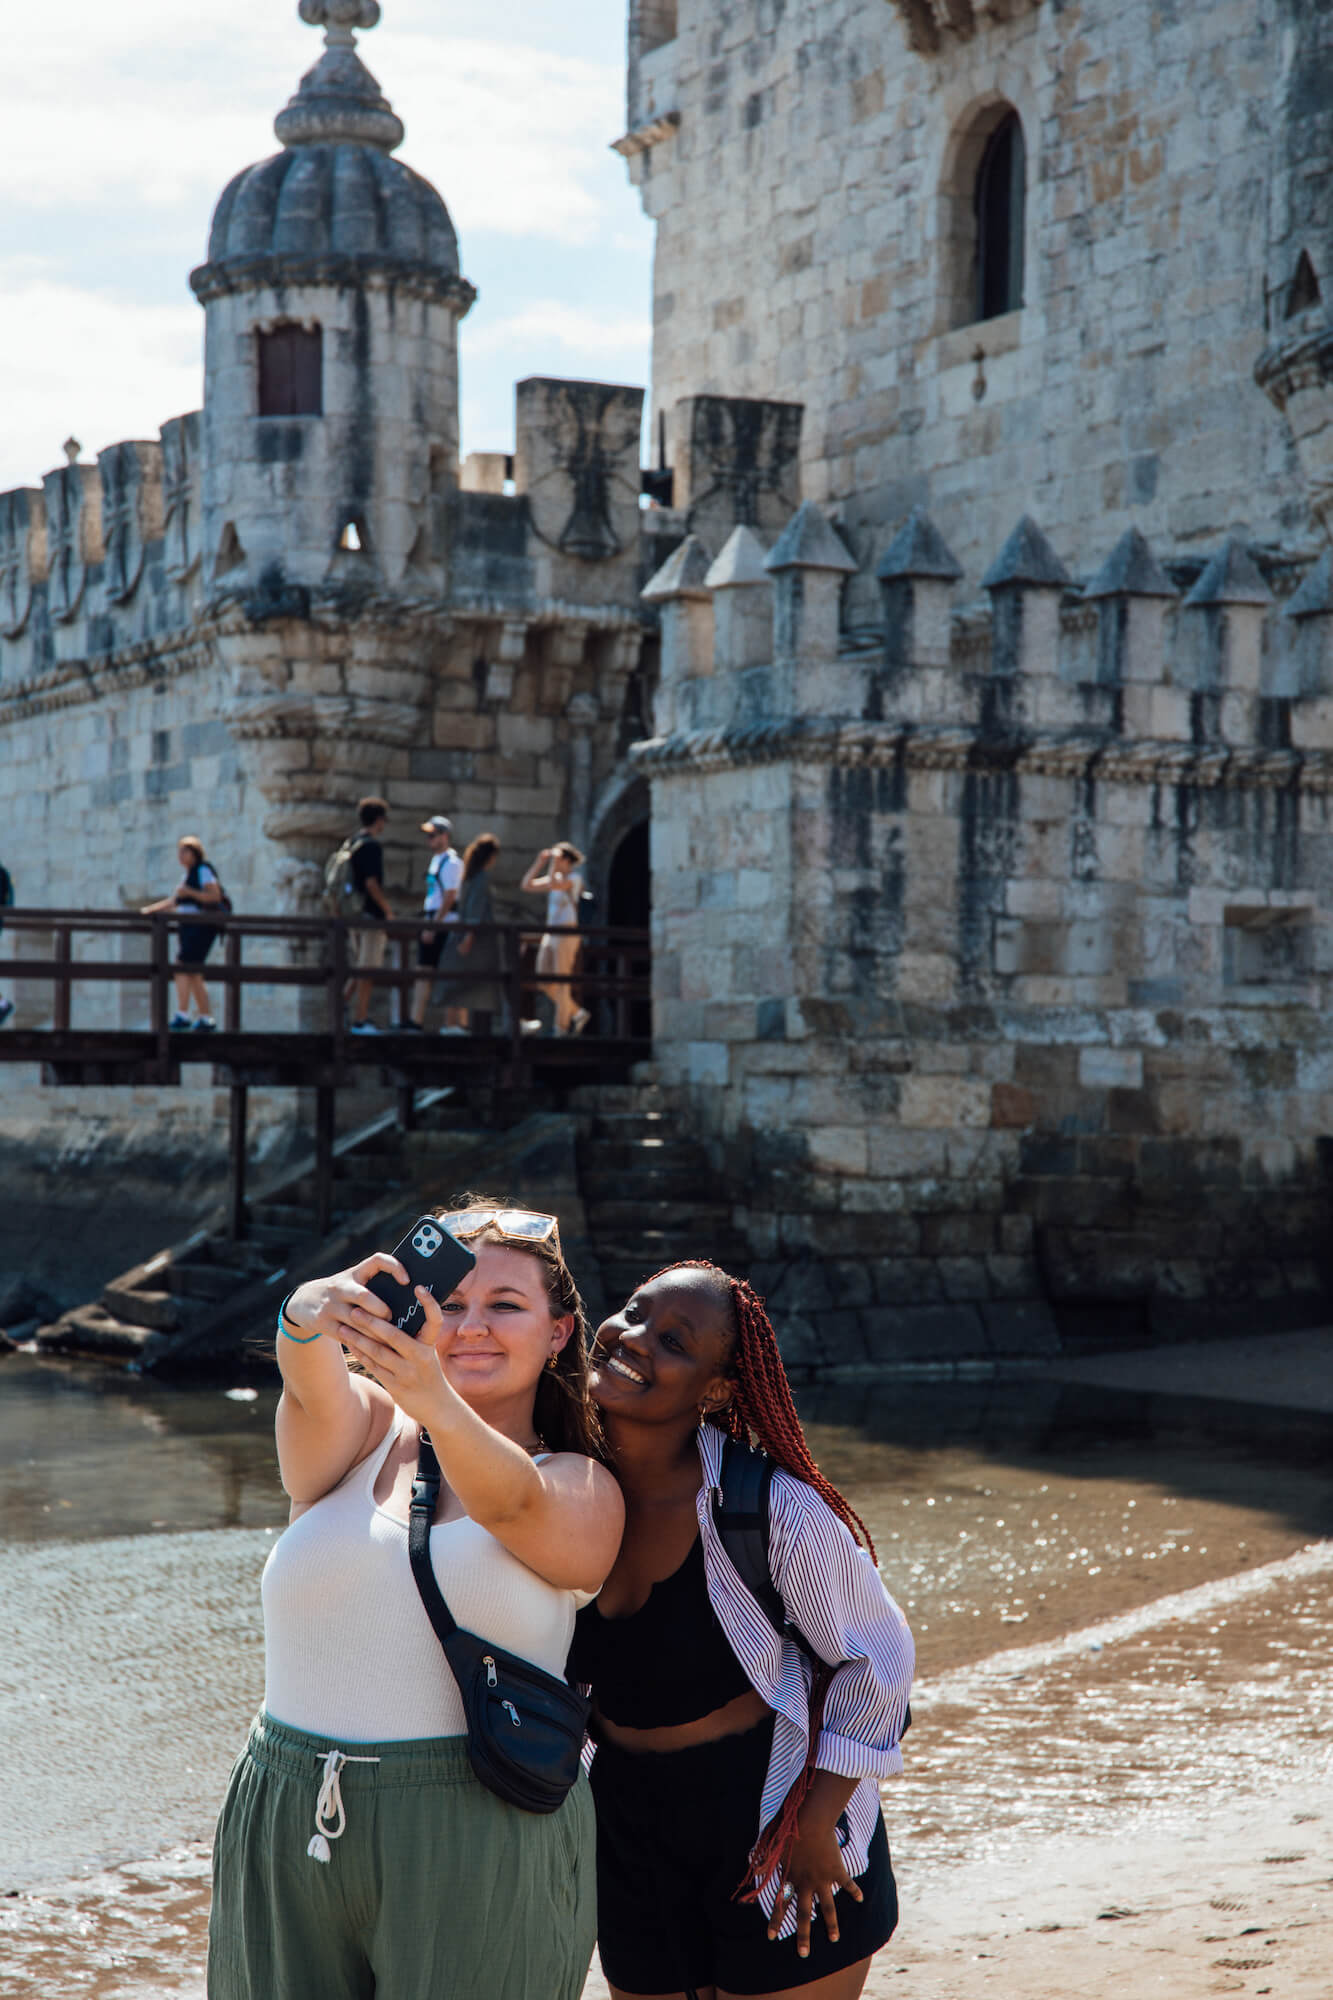 Two young women pose for a selfie on a beach in front of a stone, castle-like building. In the background, people enter and exit the building via a wooden bridge over water.